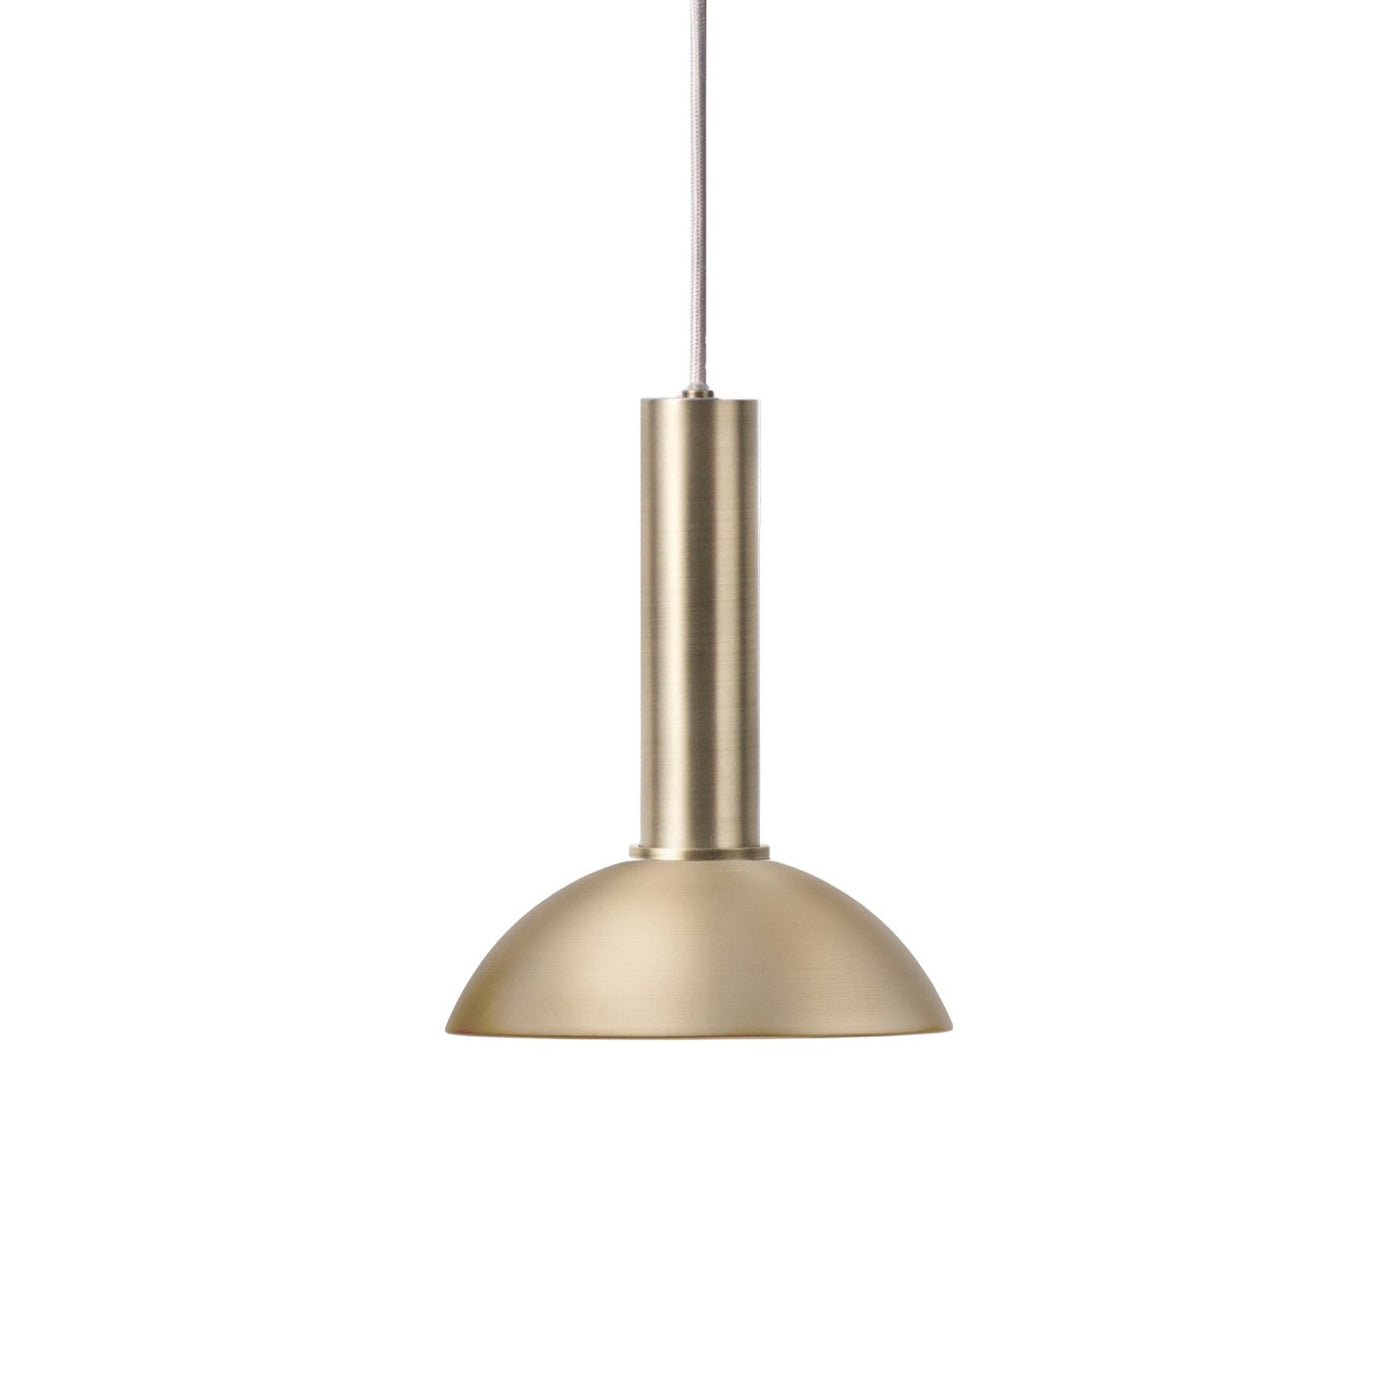 ferm LIVING Collect Lighting hoop Shade. Shop online at someday designs. #colour_brass